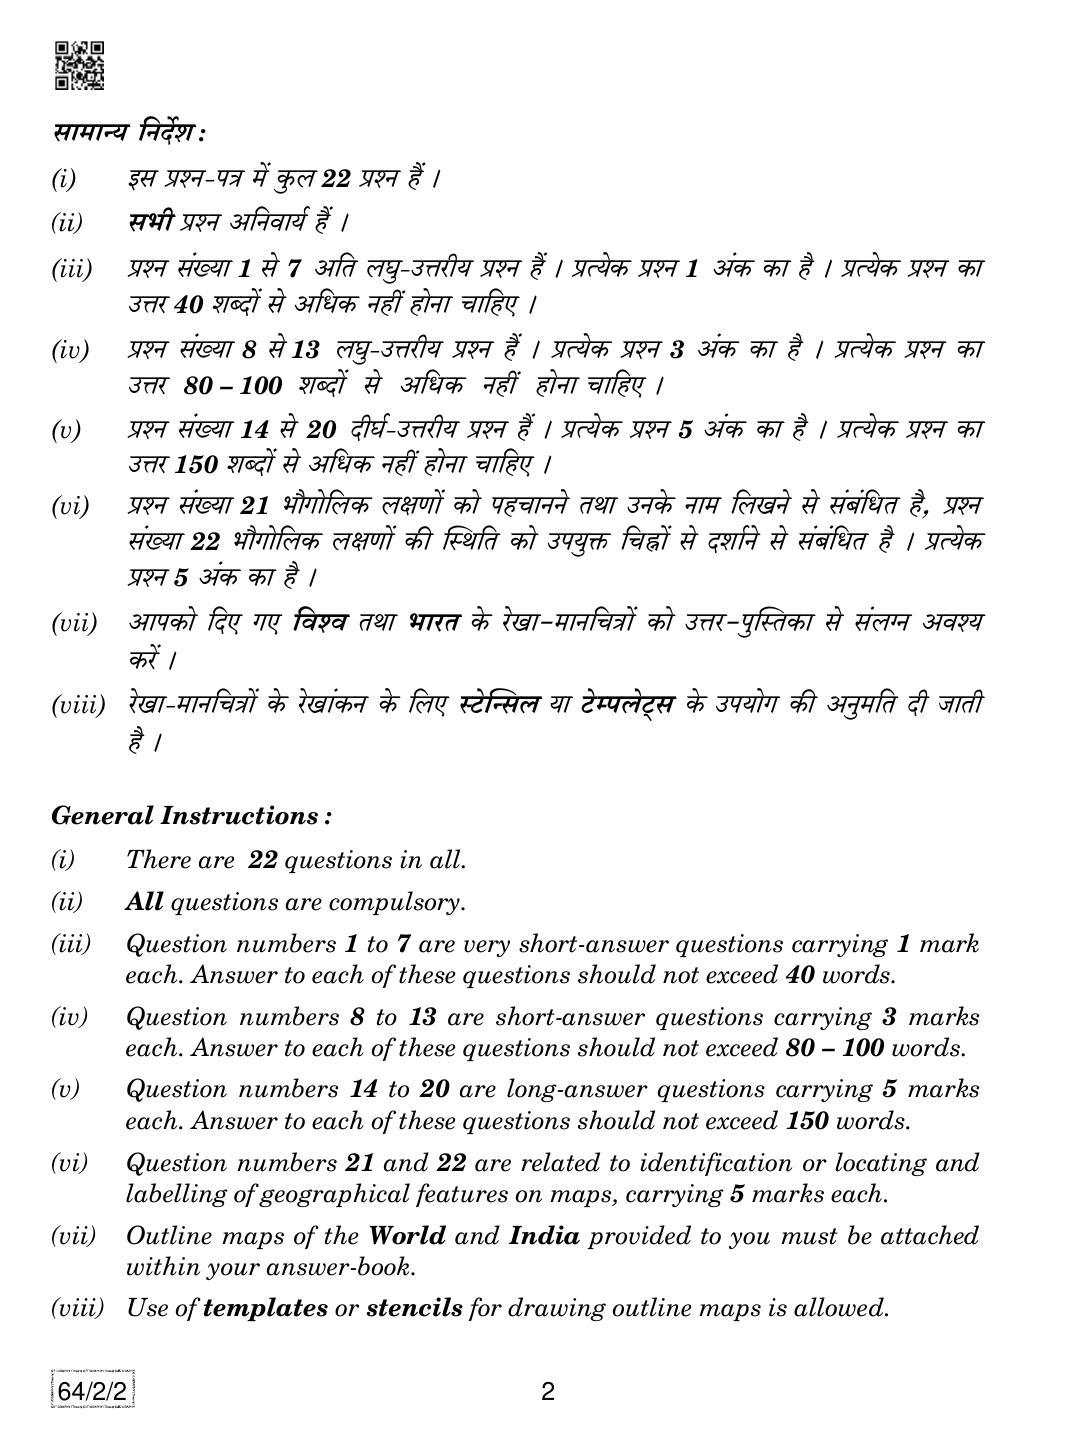 CBSE Class 12 64-2-2 Geography 2019 Question Paper - Page 2